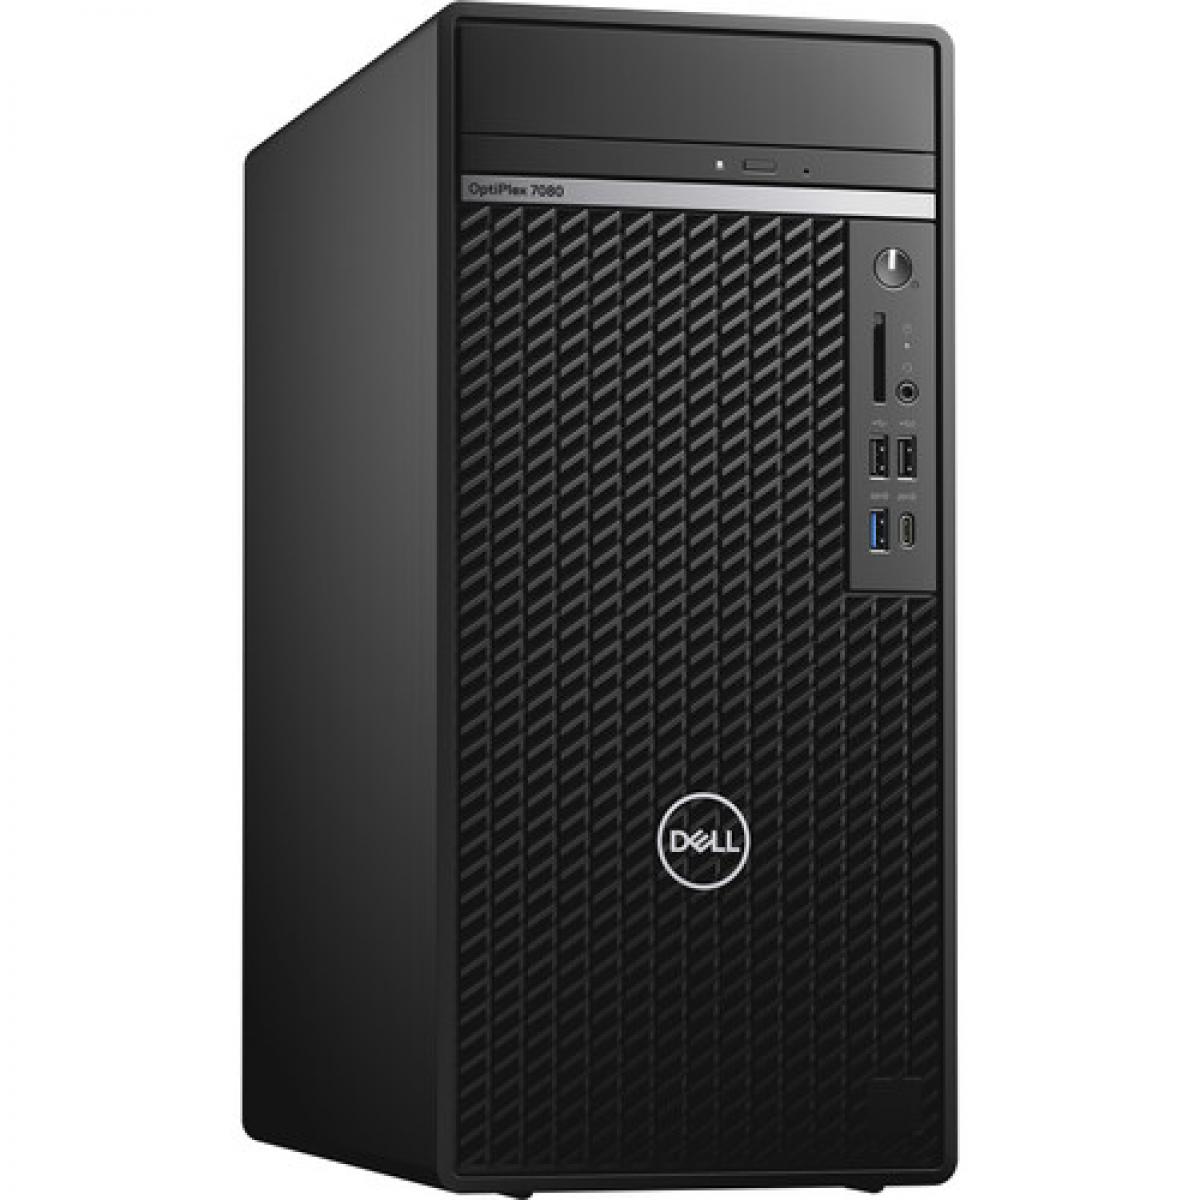 product-name:Dell OptiPlex 3080 Desktop 10th Gen Core i5-10500 Up To 4.5GHZ , 4GB DDR4, 1TB HDD,supplier-name:Mania Computer Store